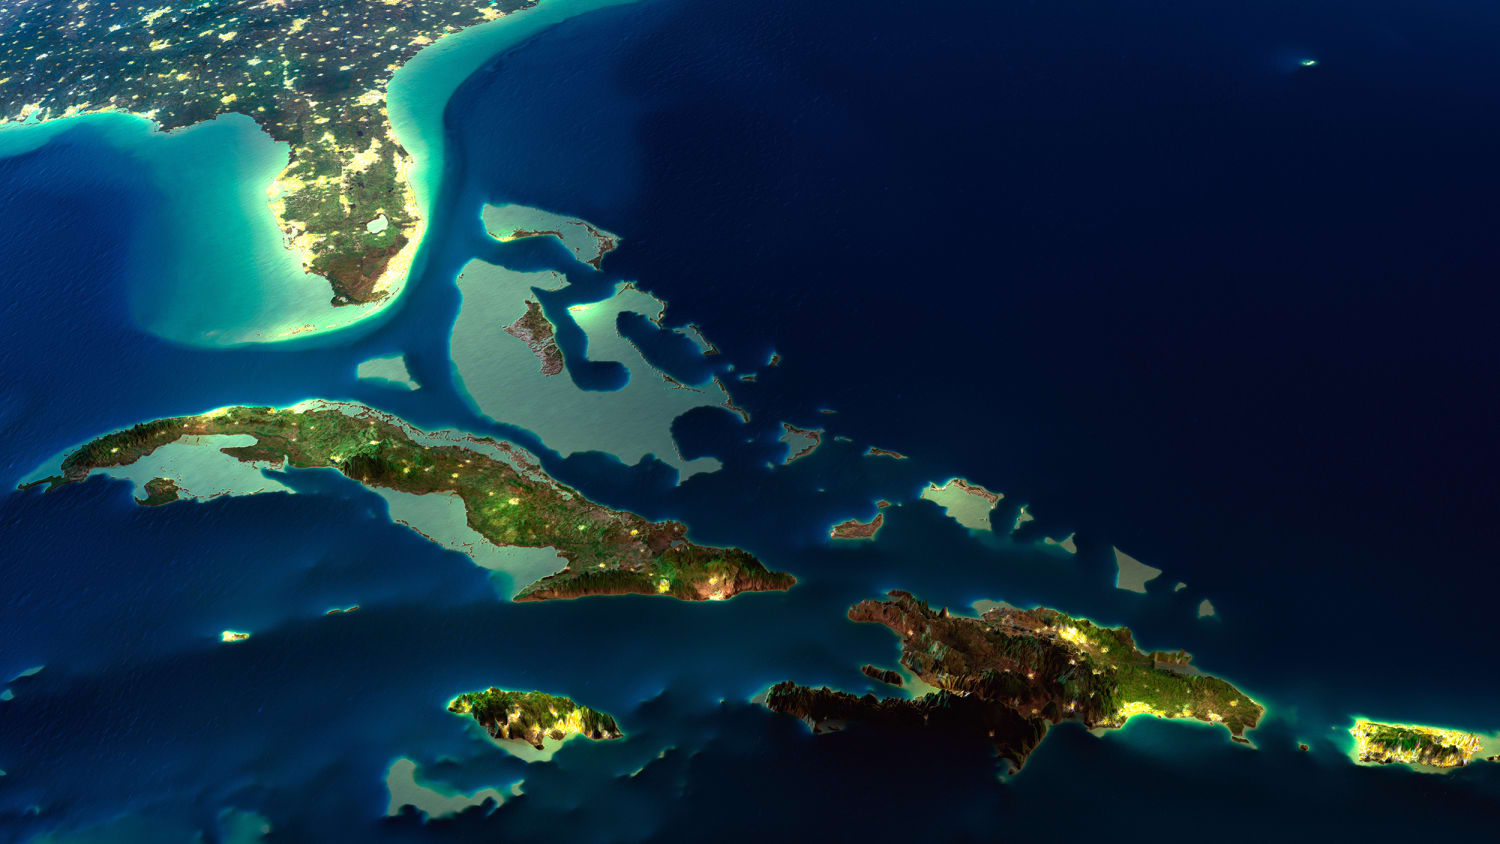 What Are Some Interesting Facts About the Bermuda Triangle?